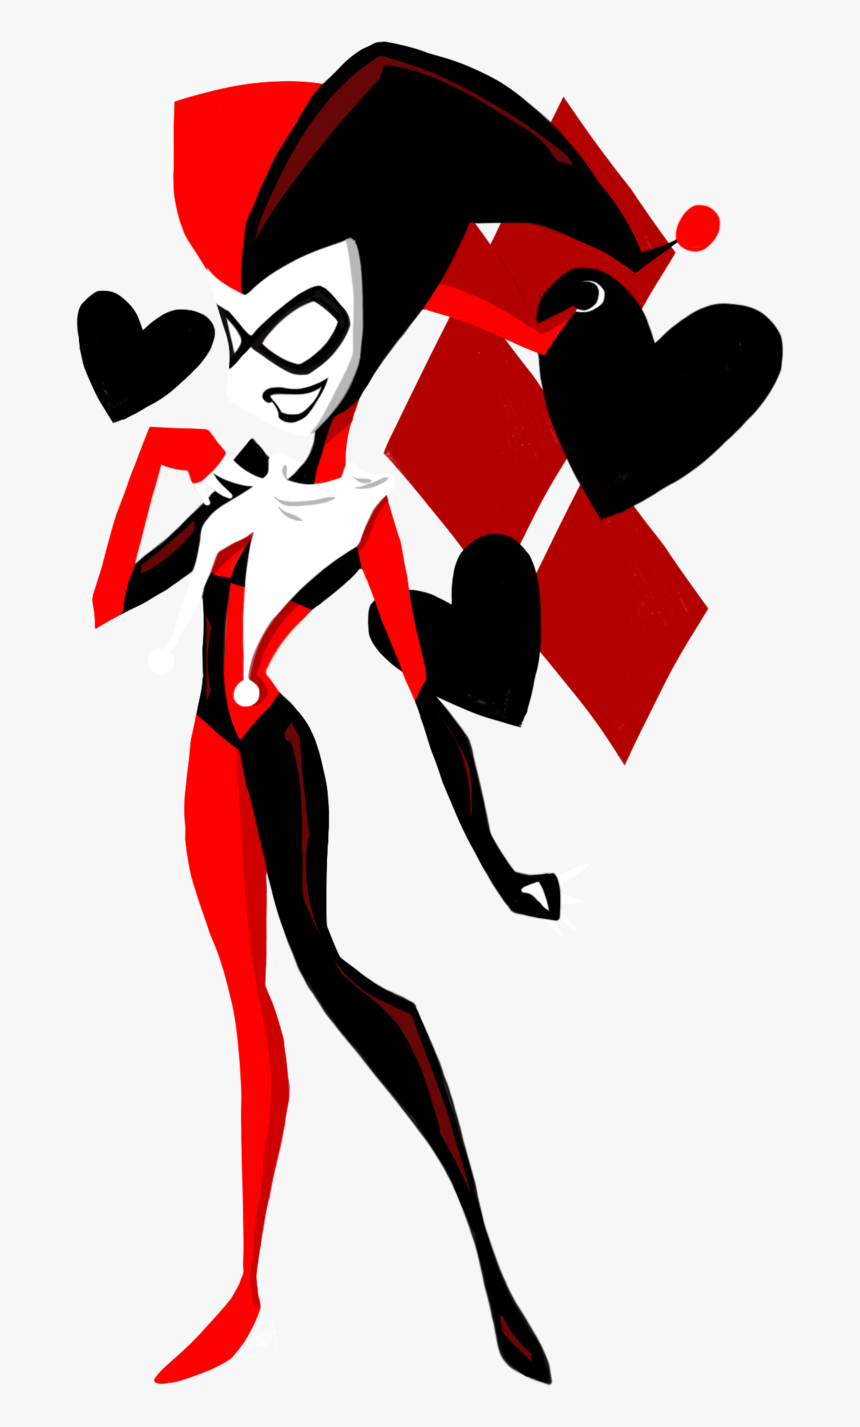 Harley Quinn By Syperxlove6-d6c4y3b - Harley Quinn Png Gif, Transparent Png, Free Download